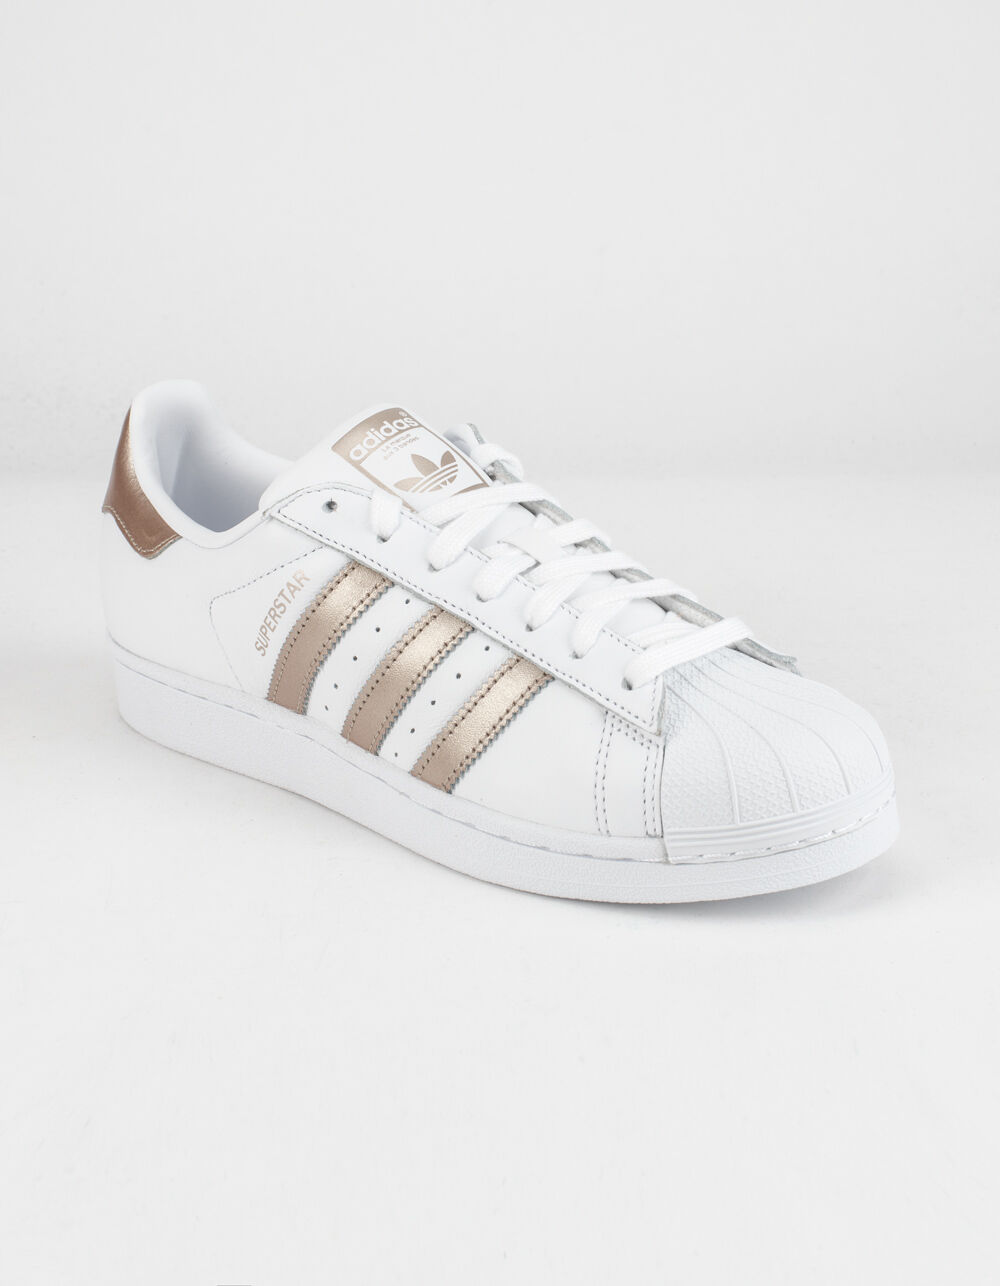 ADIDAS Superstar Womens Shoes - WHITE/GOLD | Tillys